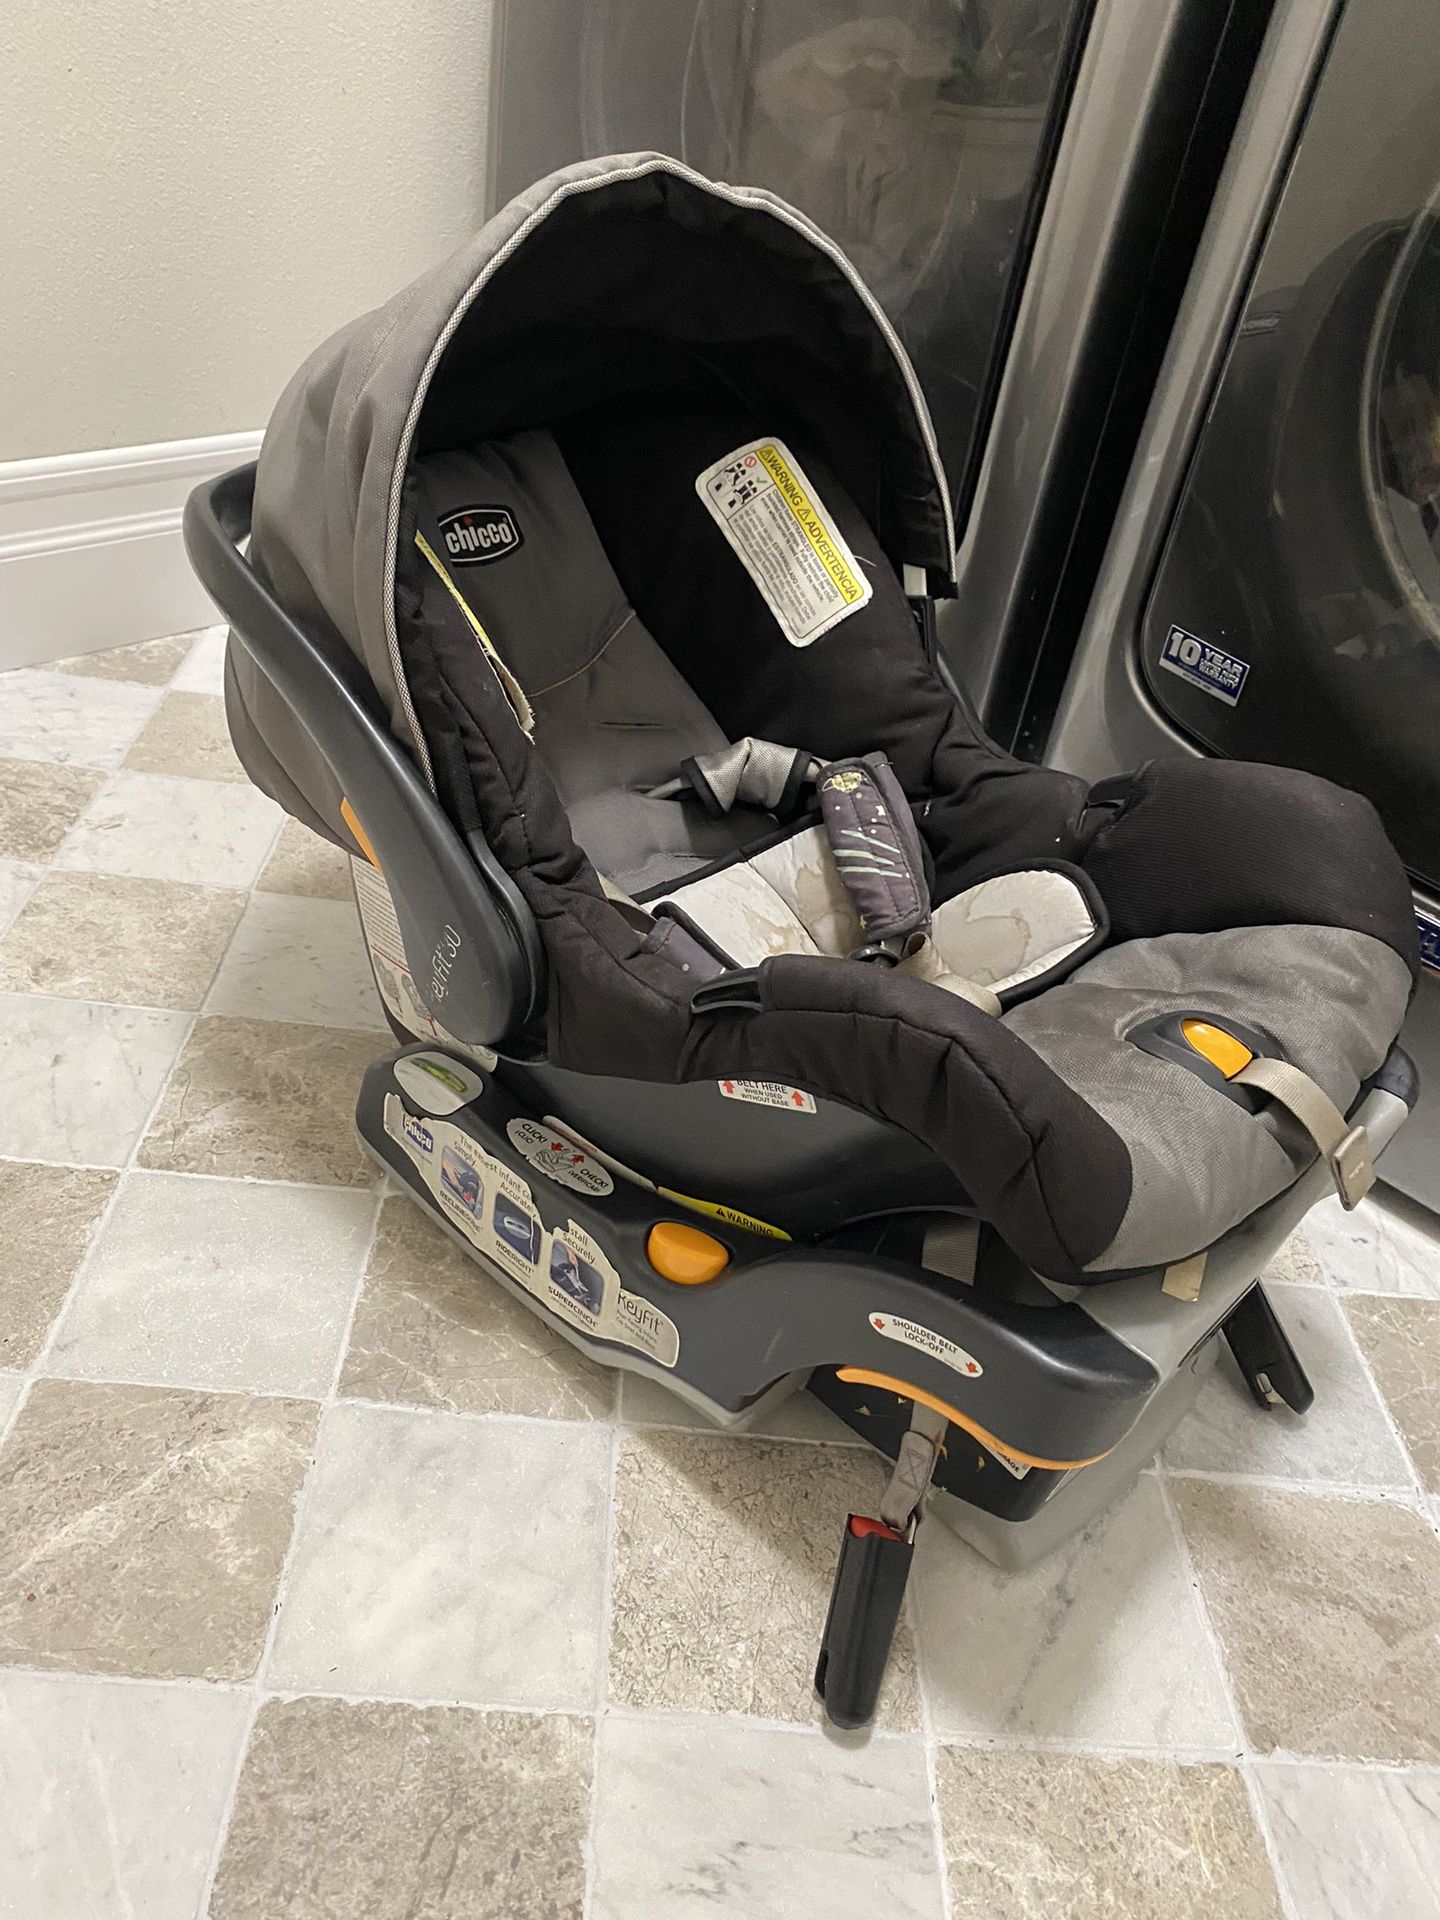 Chicco KeyFit 30 Infant Car Seat Caddie and Base